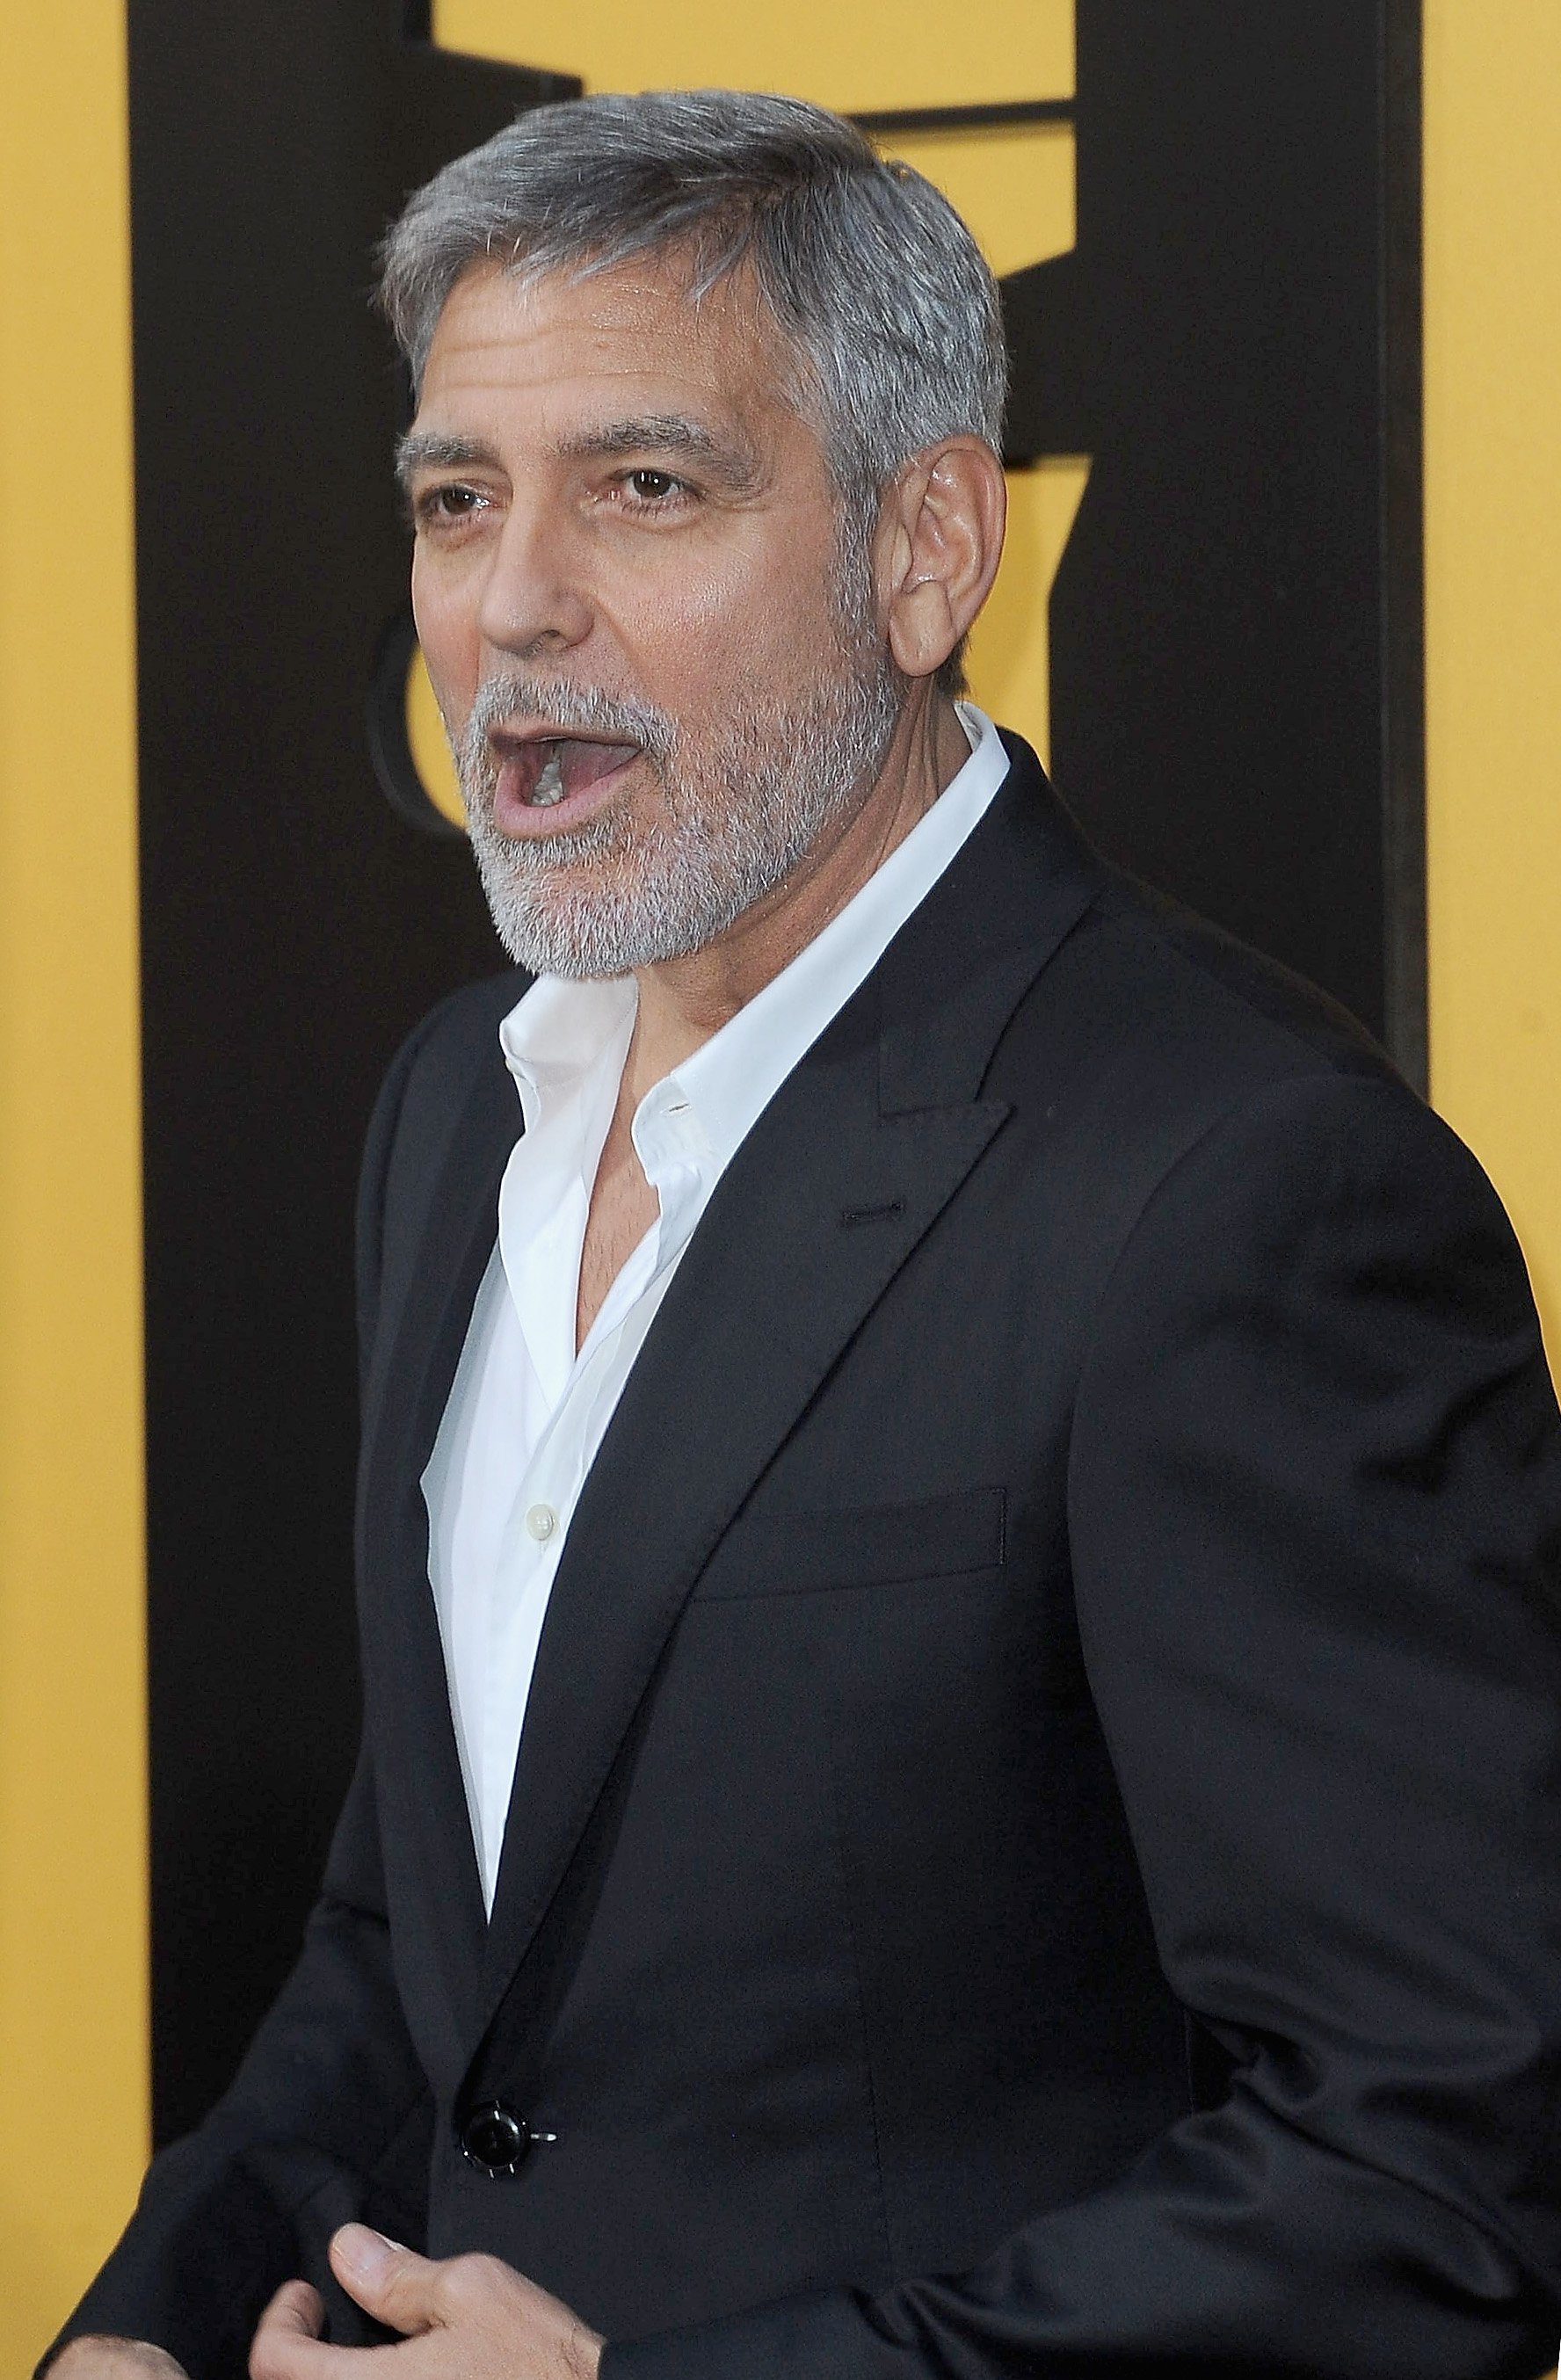 George Clooney attends the premiere of "Catch-22" on May 7, 2019 | Photo: Getty Images